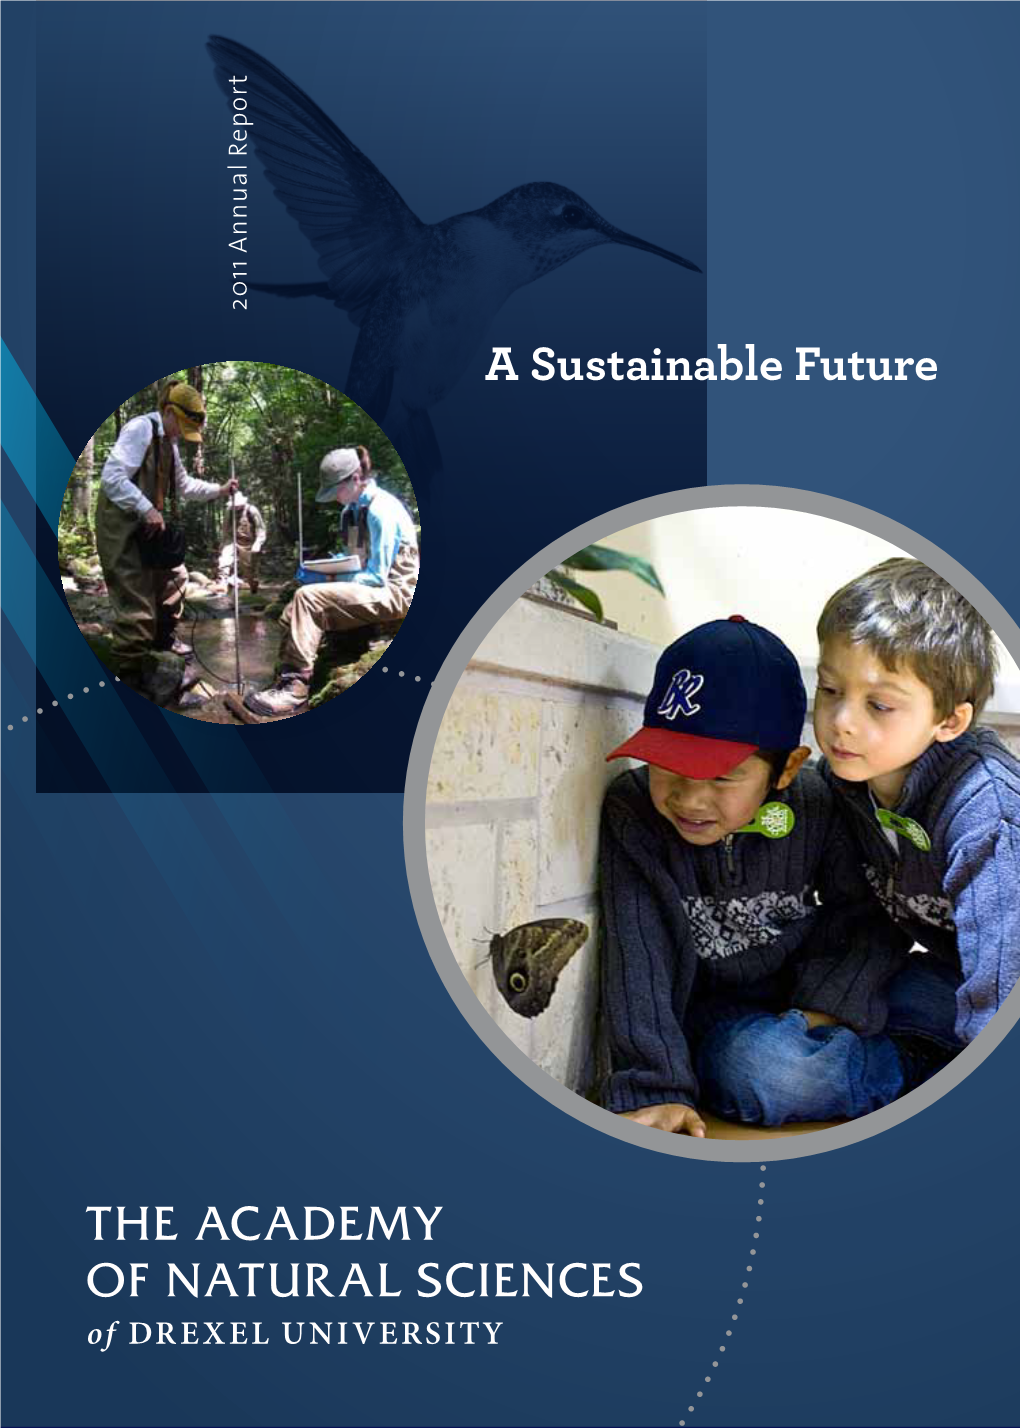 2011 Annual Report a Sustainable Future the Academy of Natural Sciences of Drexel University